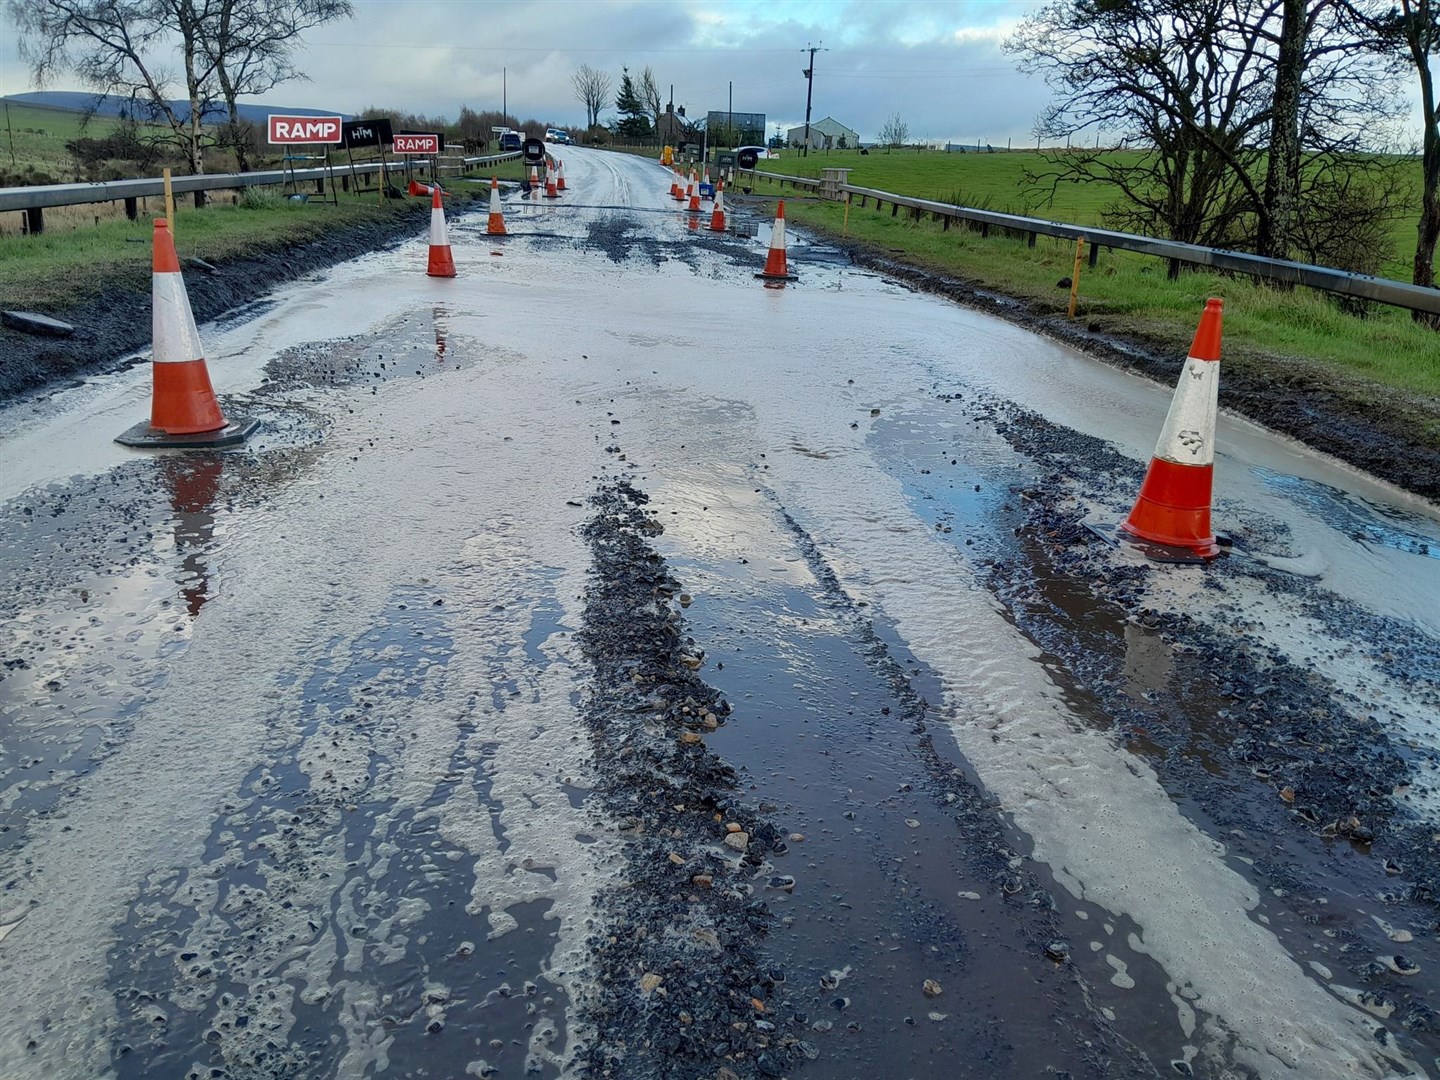 Amey has released new images which show the extent of flooding issues which mean the A96 will be closed until at least 6.30am on Wednesday.